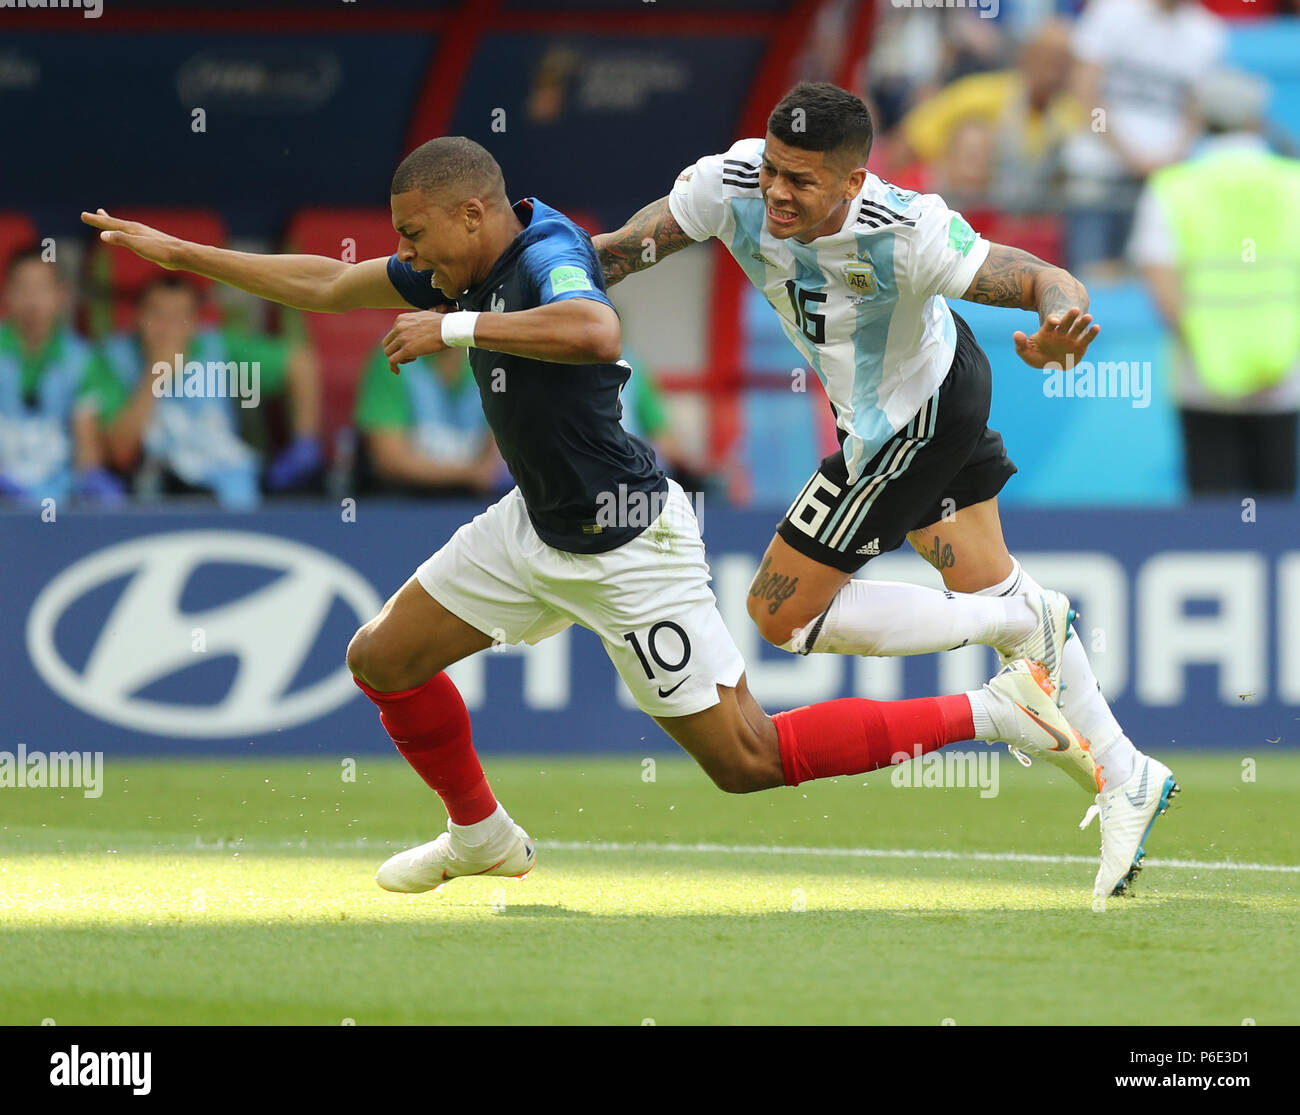 (180630) -- KAZAN, June 30, 2018 (Xinhua) -- Kylian Mbappe (L) of France is fouled by Marcos Rojo of Argentina during the 2018 FIFA World Cup round of 16 match between France and Argentina in Kazan, Russia, on June 30, 2018. (Xinhua/Lu Jinbo) Stock Photo